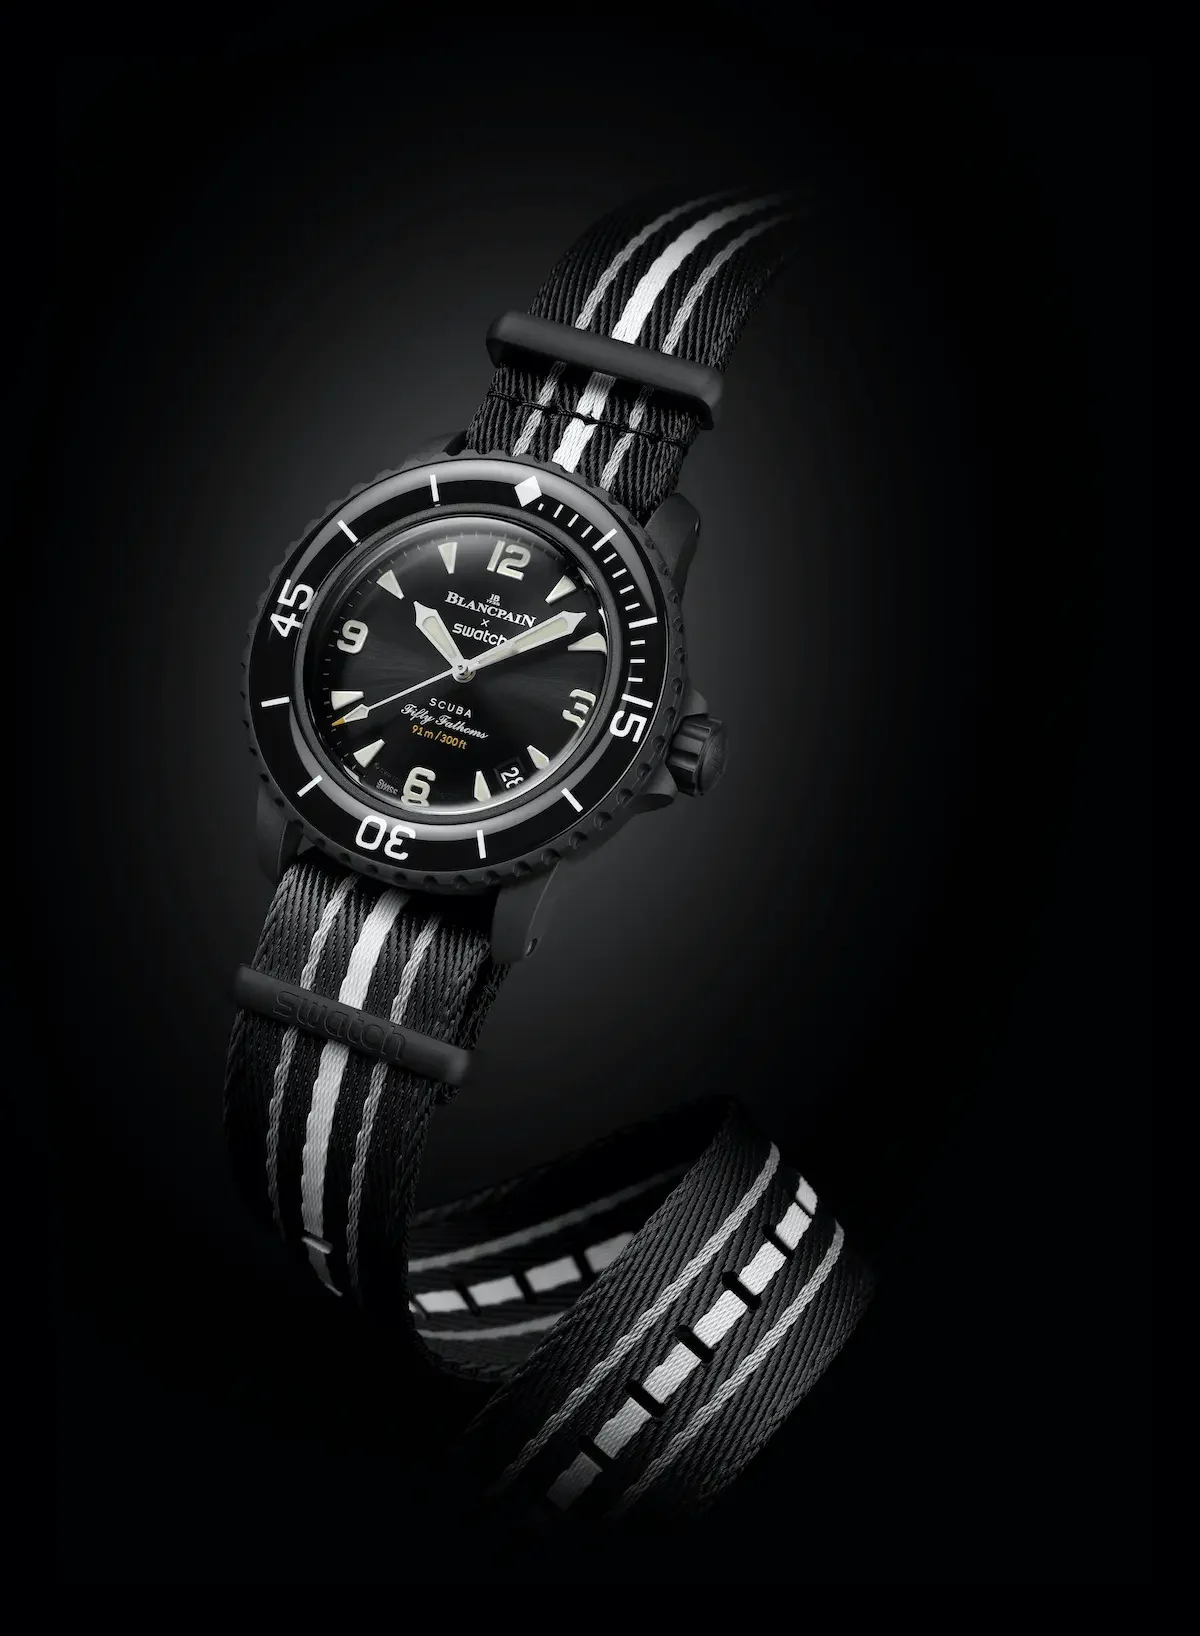 movimento Blancpain x Swatch Scuba Fifty Fathoms Ocean of Storms